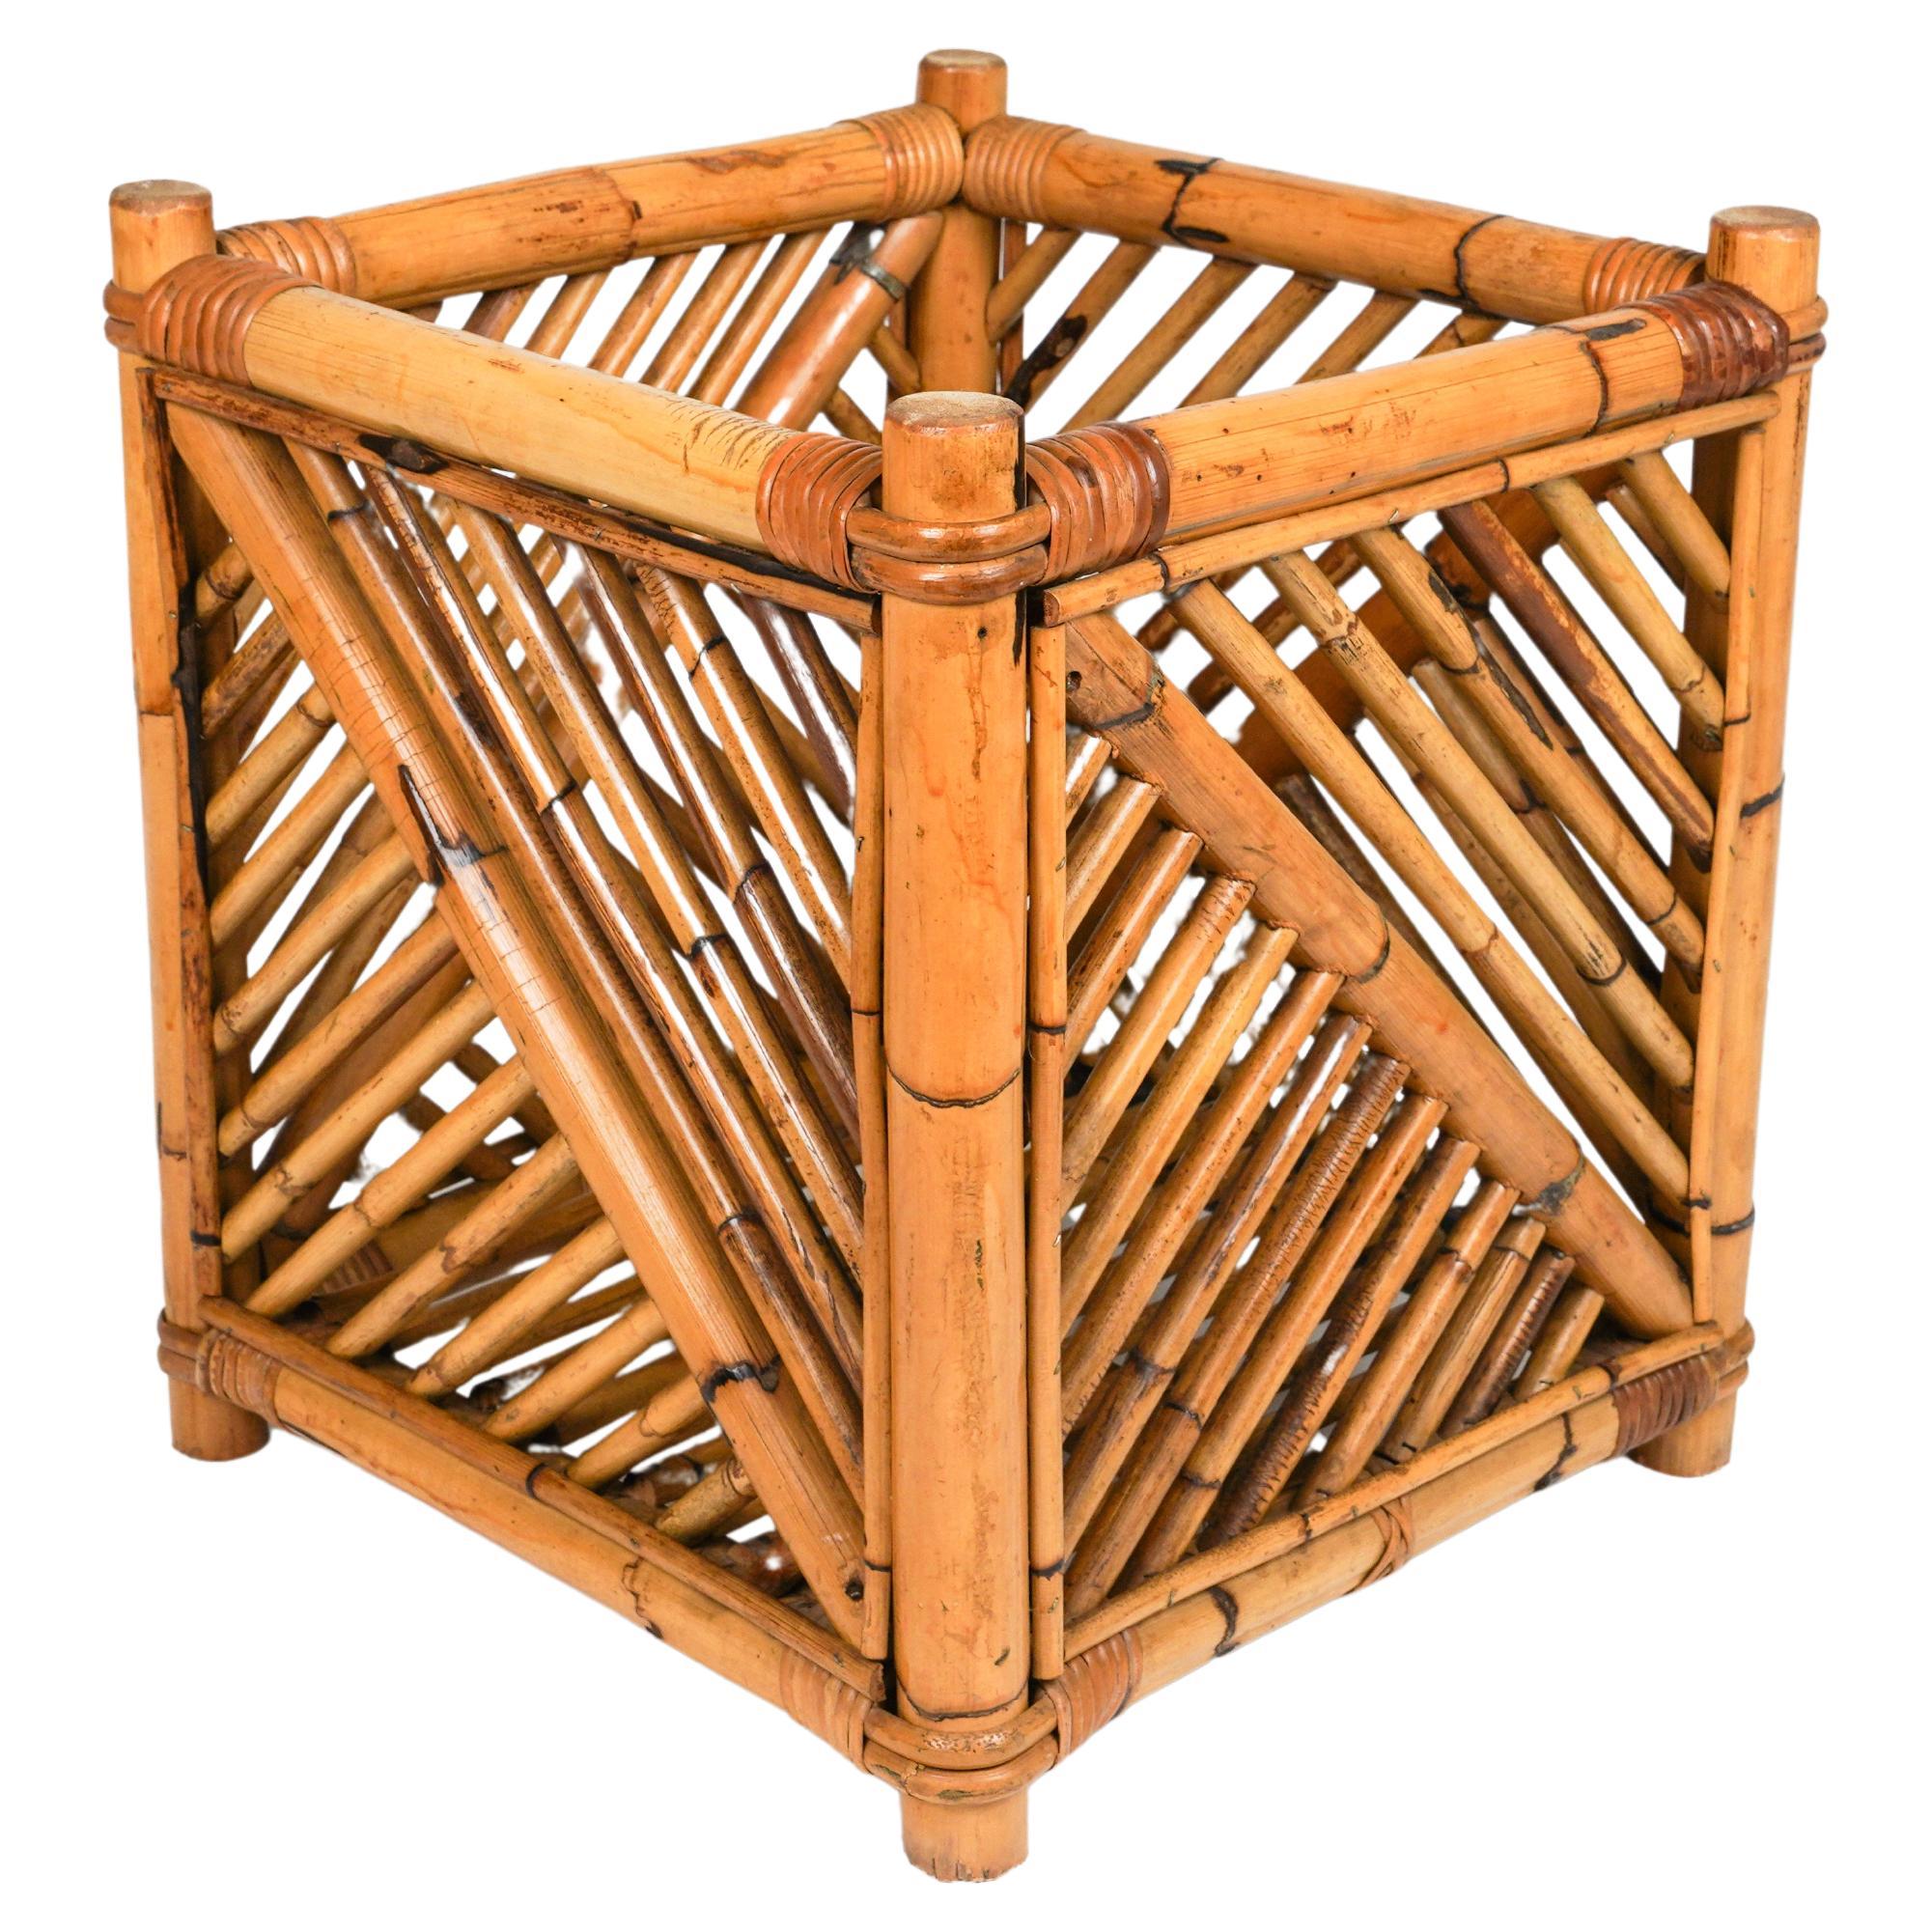 Rattan and Bamboo Plant Holder or Basket by Vivai Del Sud, Italy 1970s